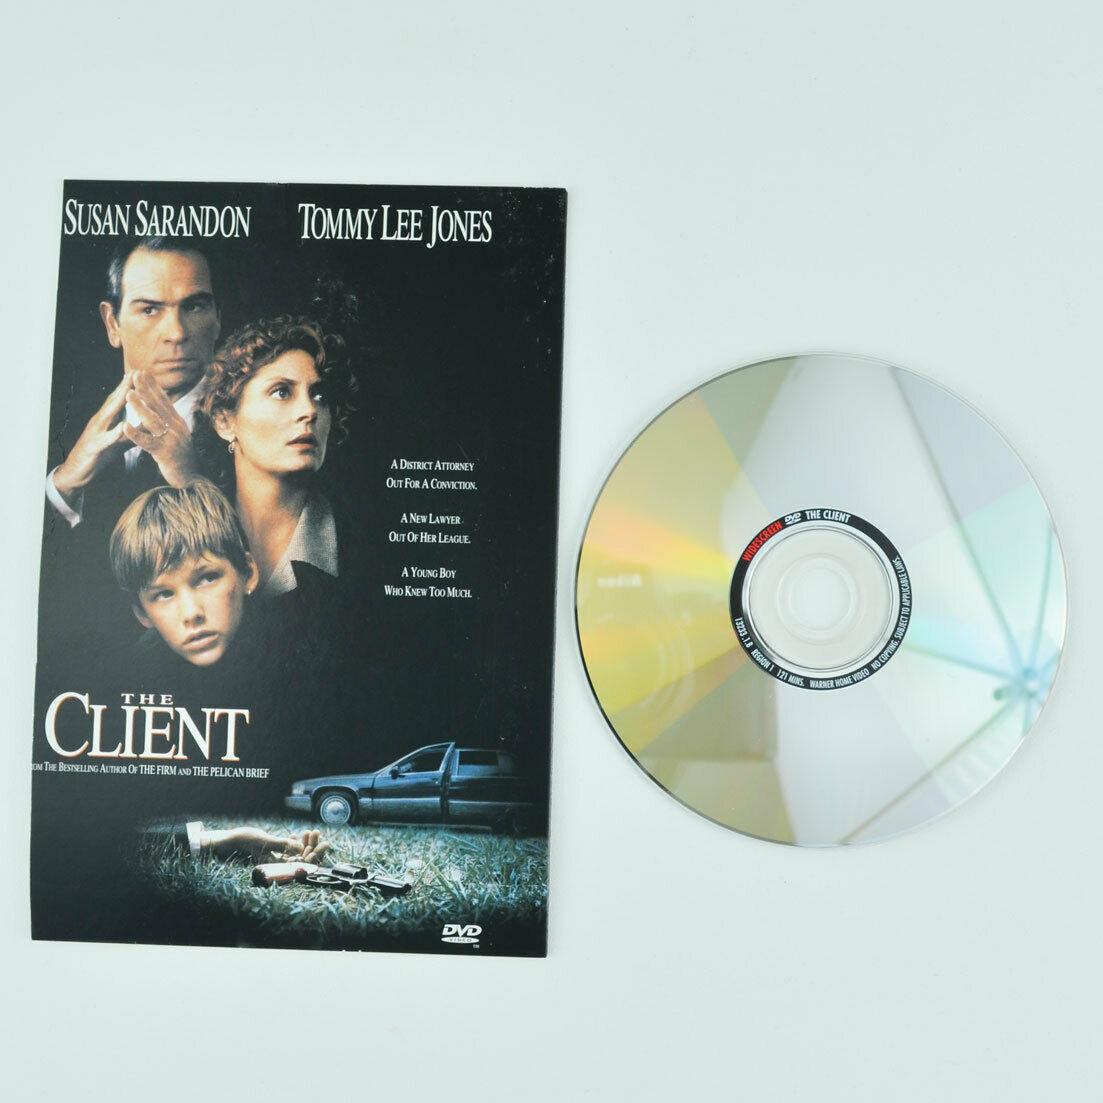 The Client (DVD, 1997) Susan Sarandon, Tommy Lee Jones Slipcover and DISC ONLY